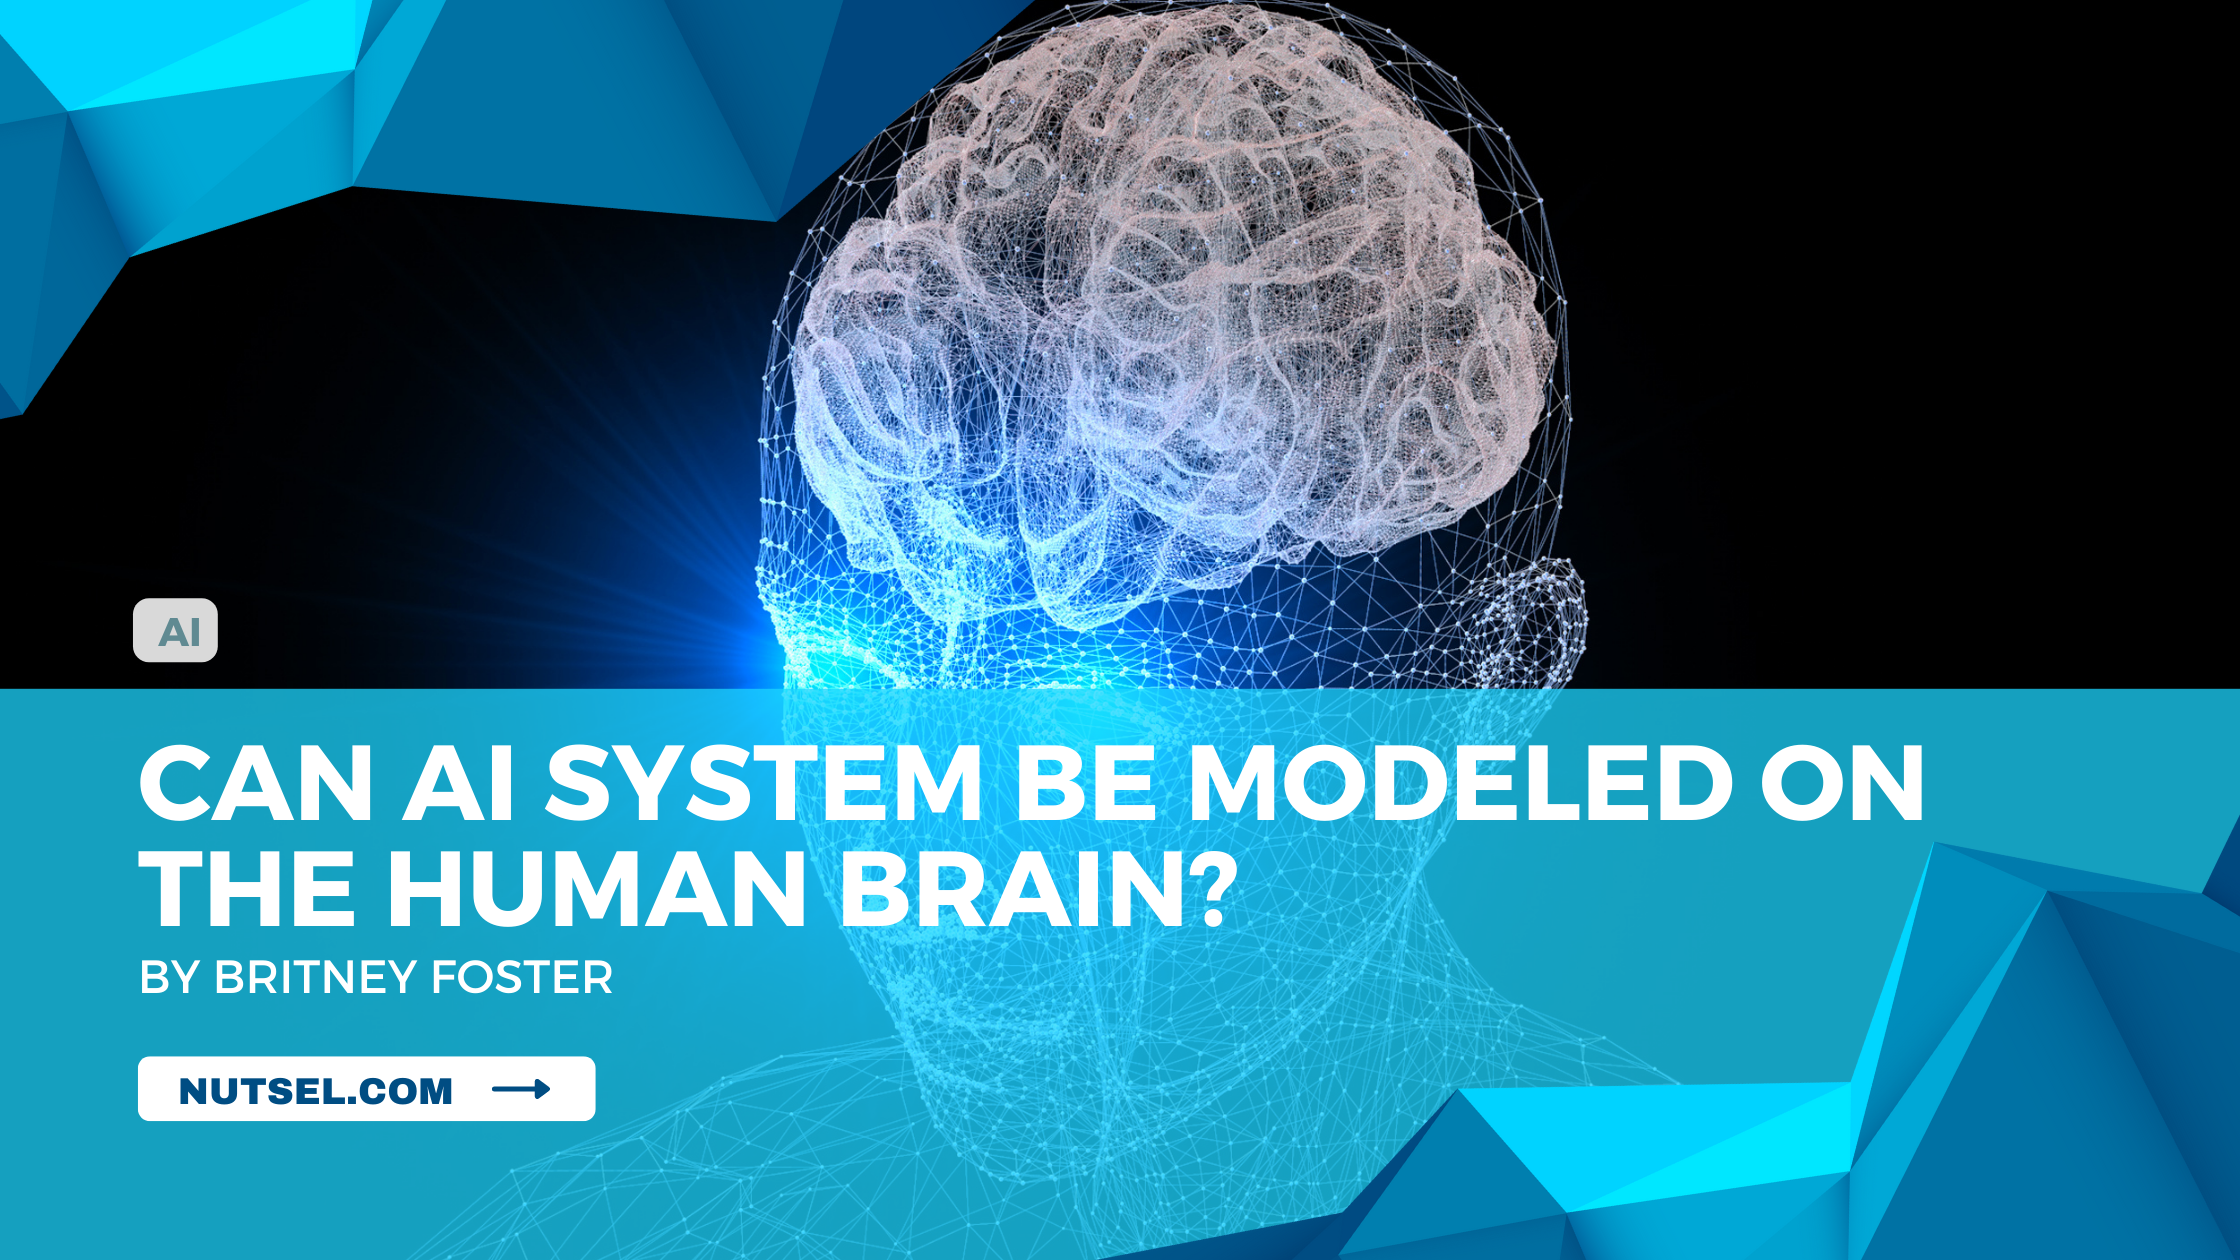 Can AI system be modeled on the human brain?